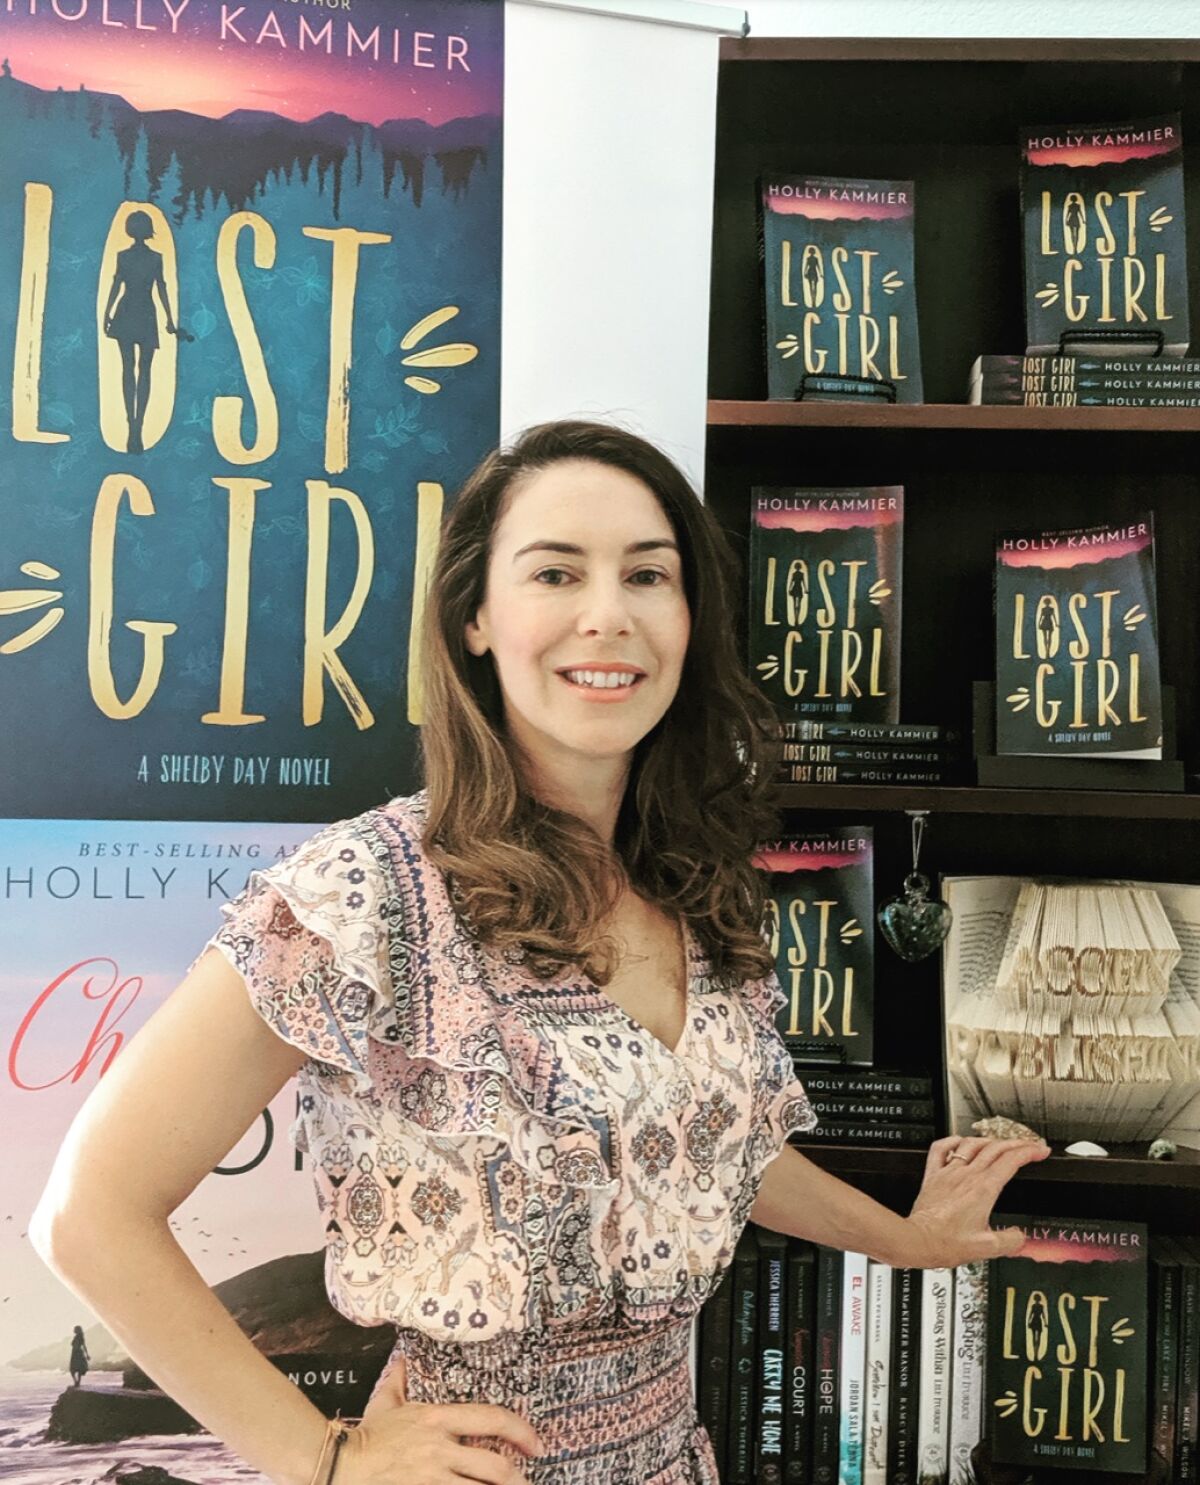 Author and publisher Holly Kammier stands in front of a poster and shelf promoting her third book, “Lost Girl, A Shelby Day Novel,” which is scheduled for release by Acorn Publishing on Jan. 5.